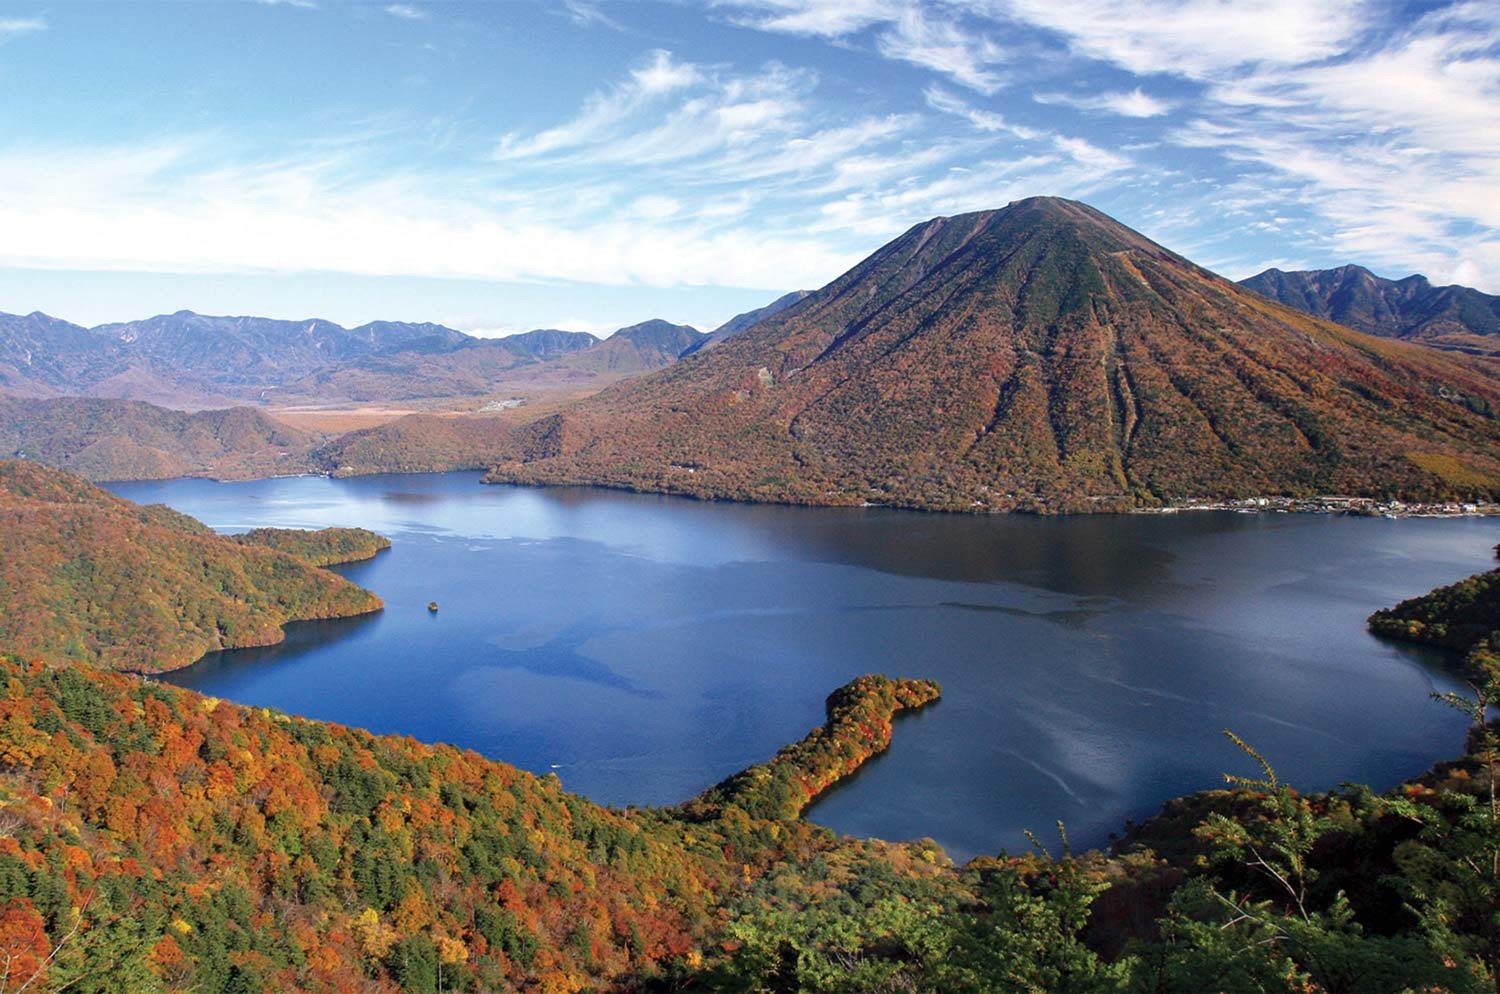  Nikko: World Heritage Sites with Gorgeous Natural Scenery 